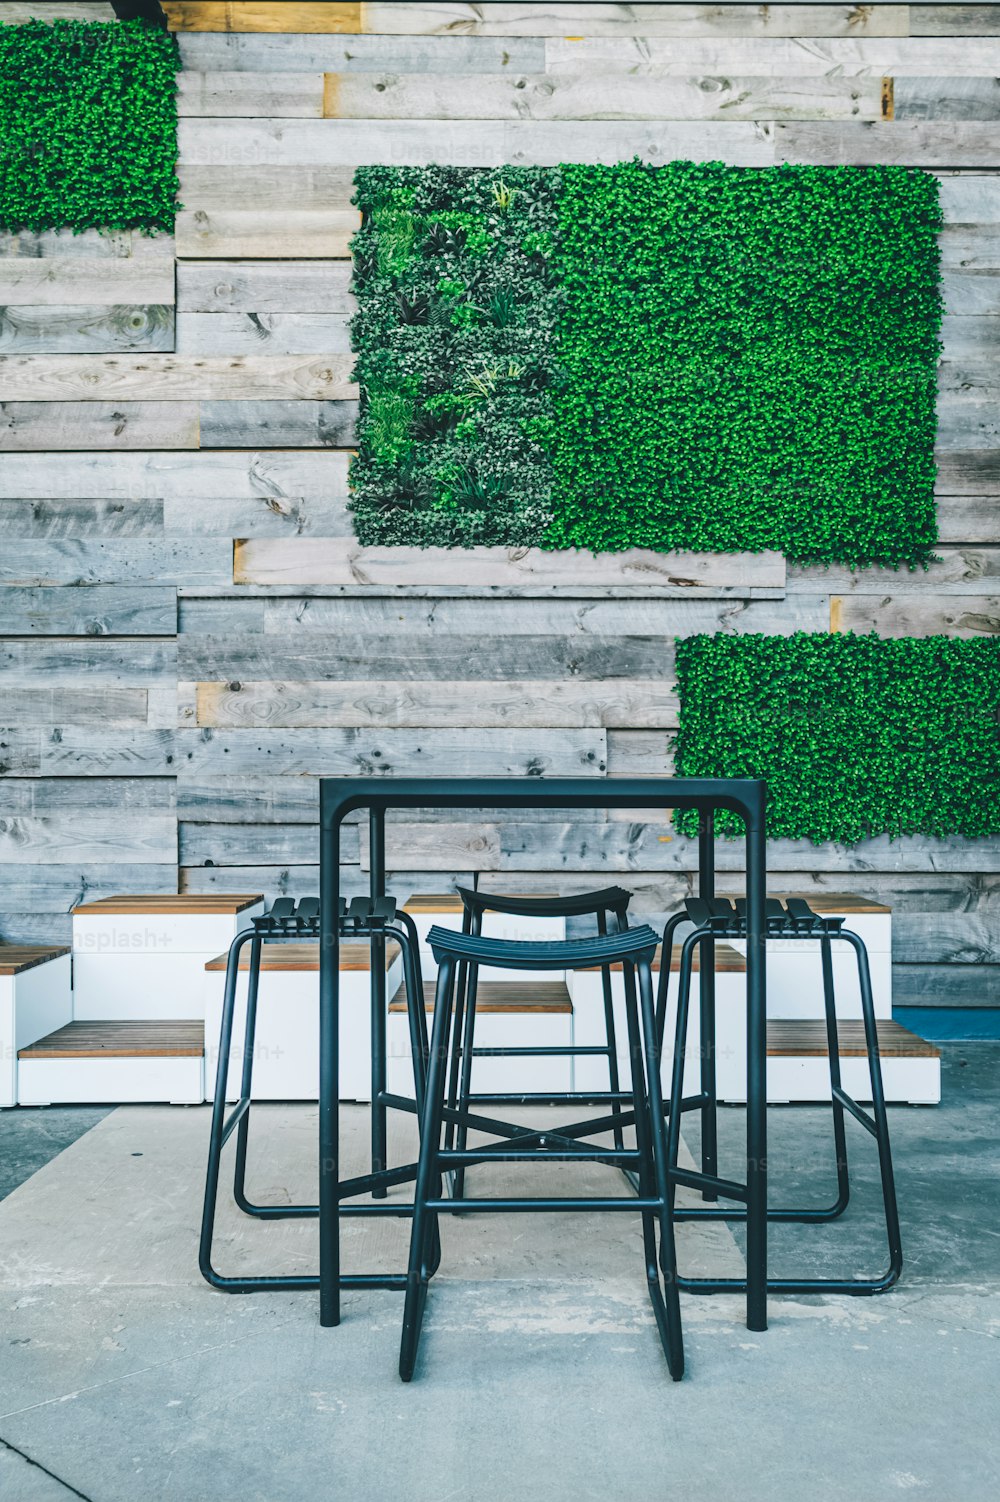 a group of chairs sitting in front of a wooden wall